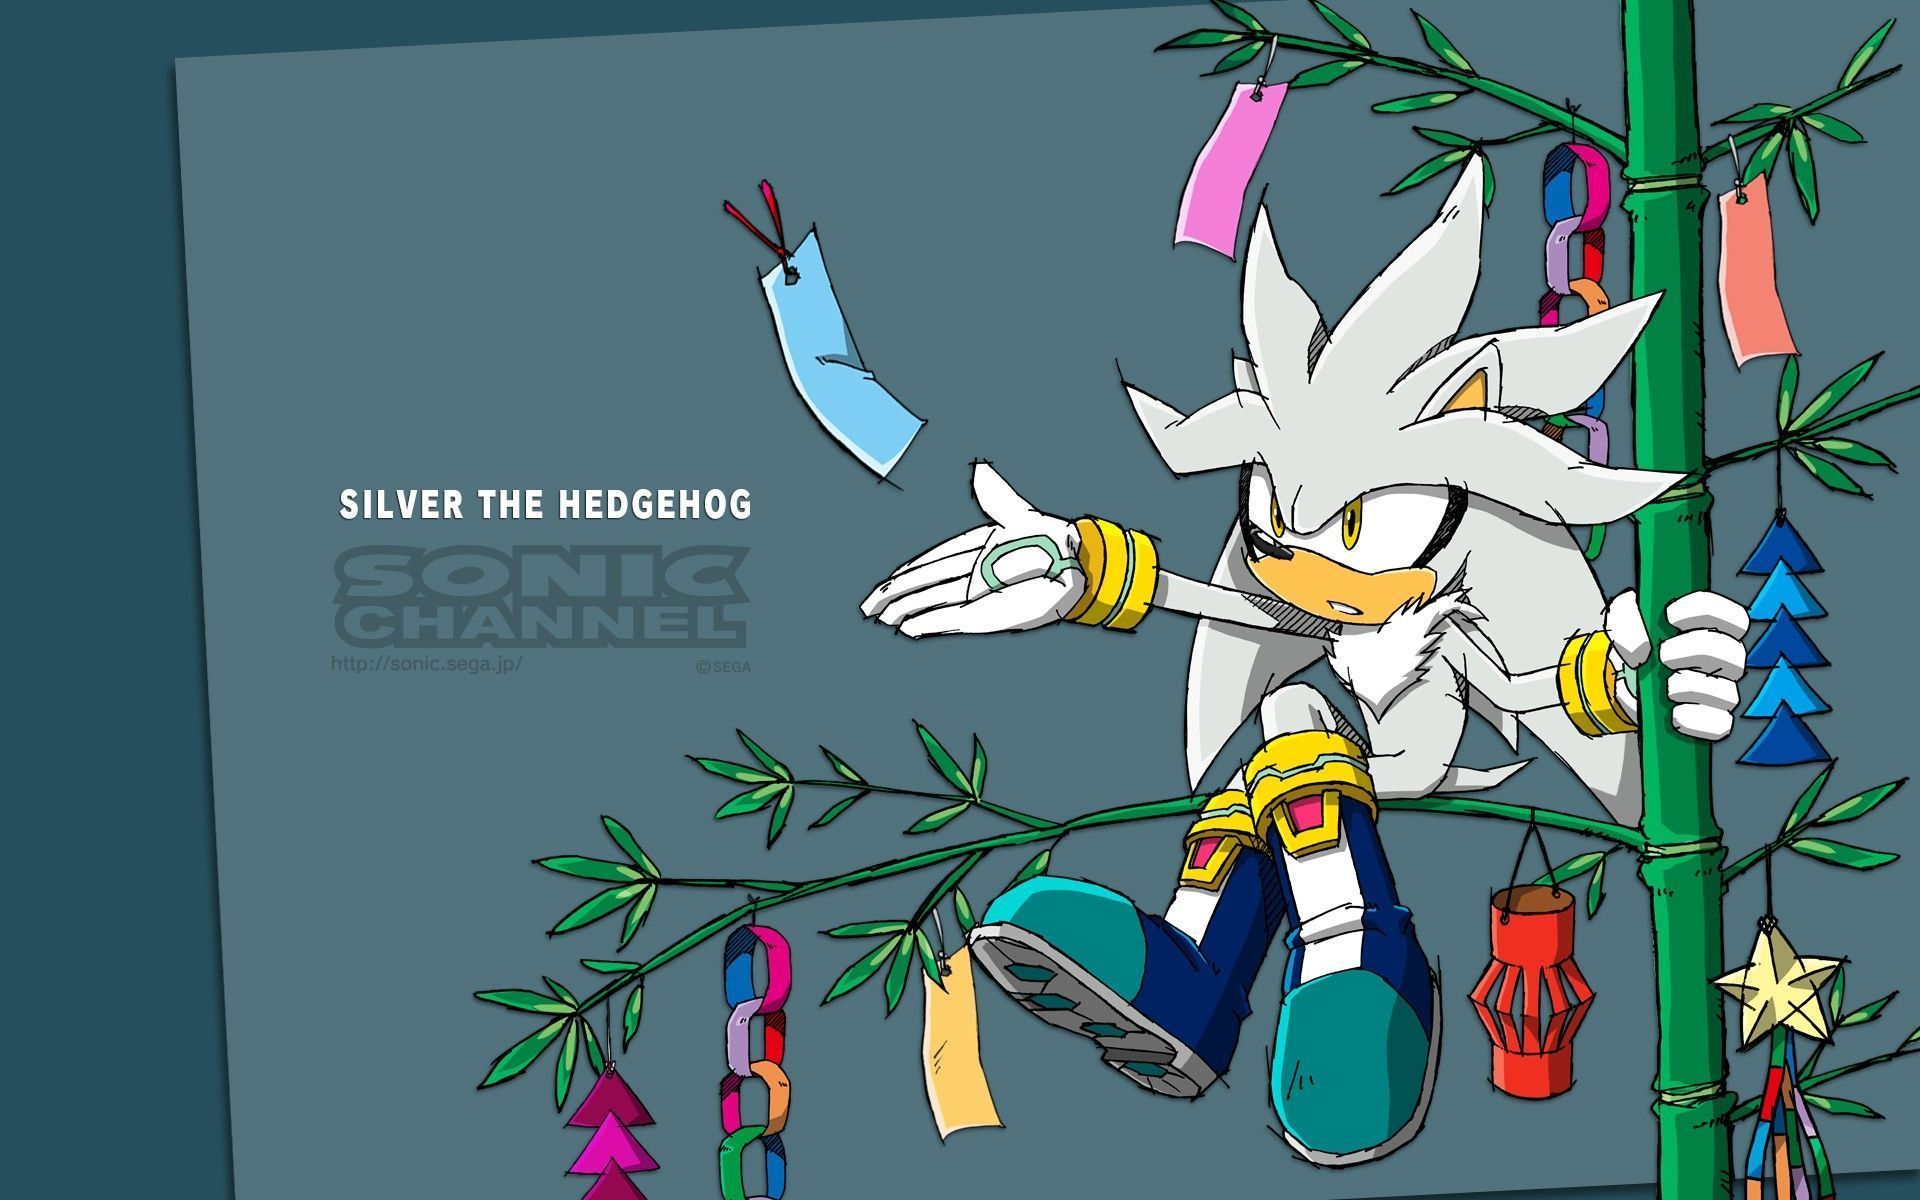 Sonic the hedgehog is sitting on a branch with some christmas decorations - Sonic